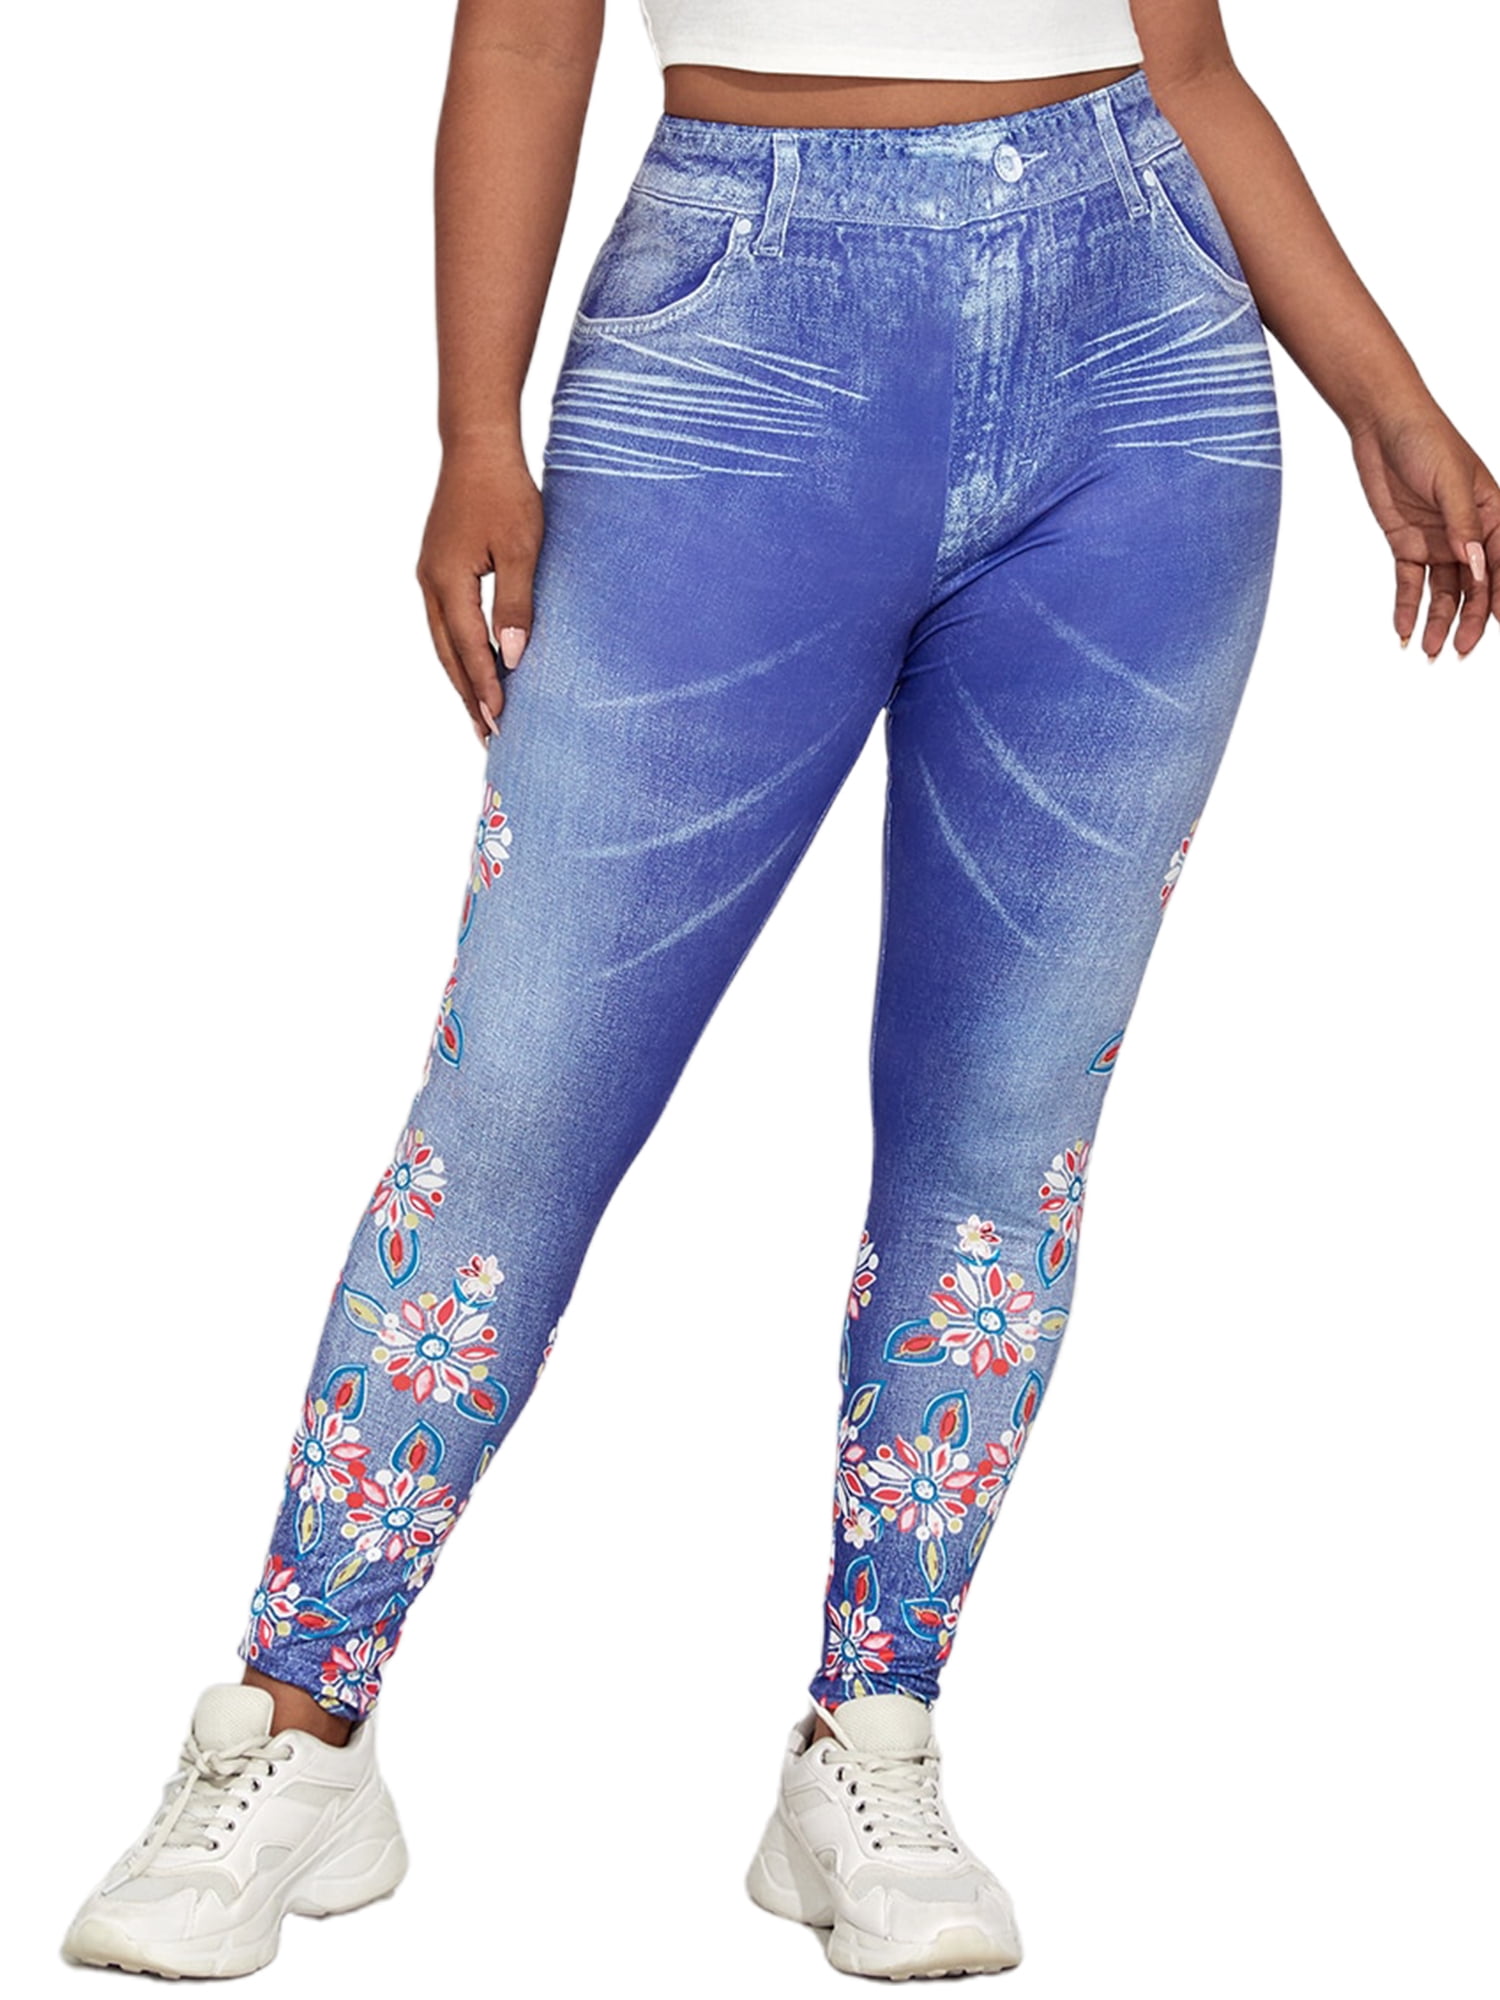 Frontwalk Jean Leggings for Women Plus Size Butterfly Printed Fake Denim  High Waisted Yoga Pants Stretch Faux Jean Look Jeggings Tights Flroal Blue  5XL 